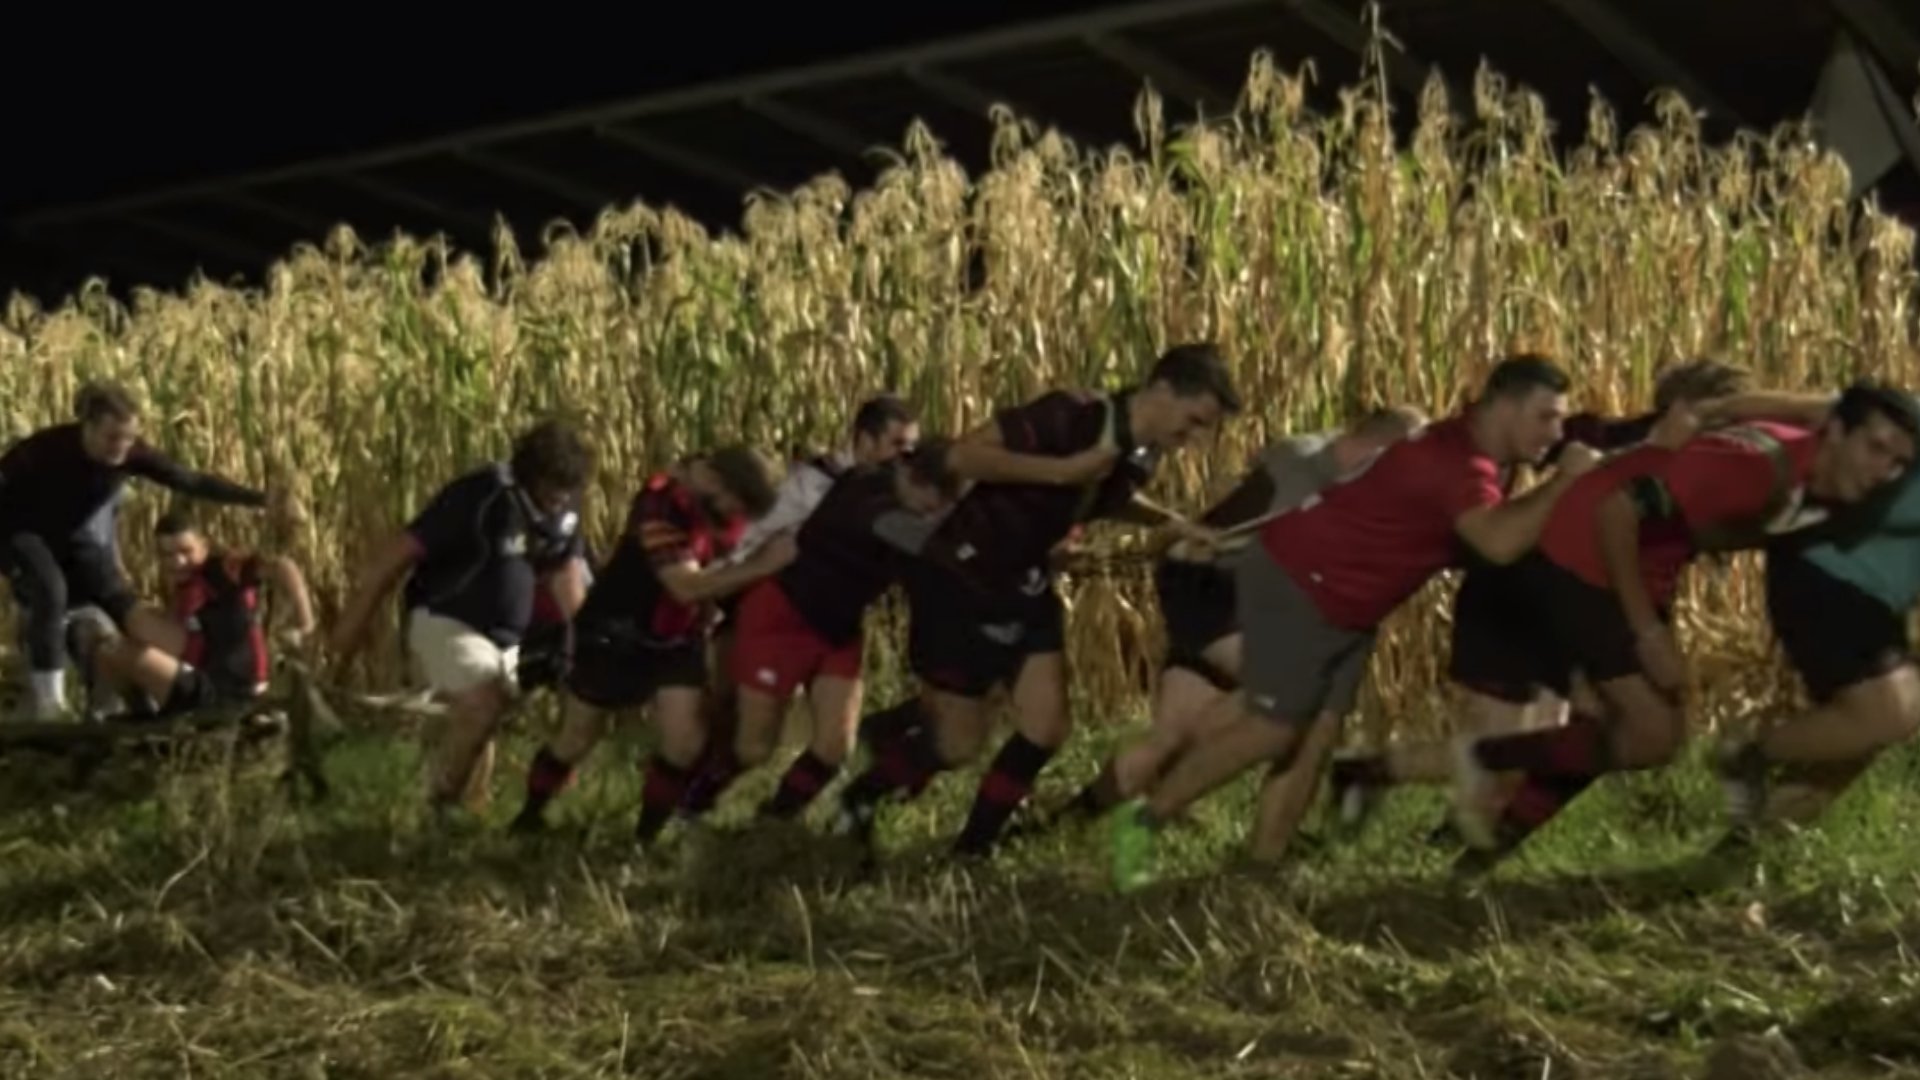 WATCH: Rugby club turns to farming to help with team fitness